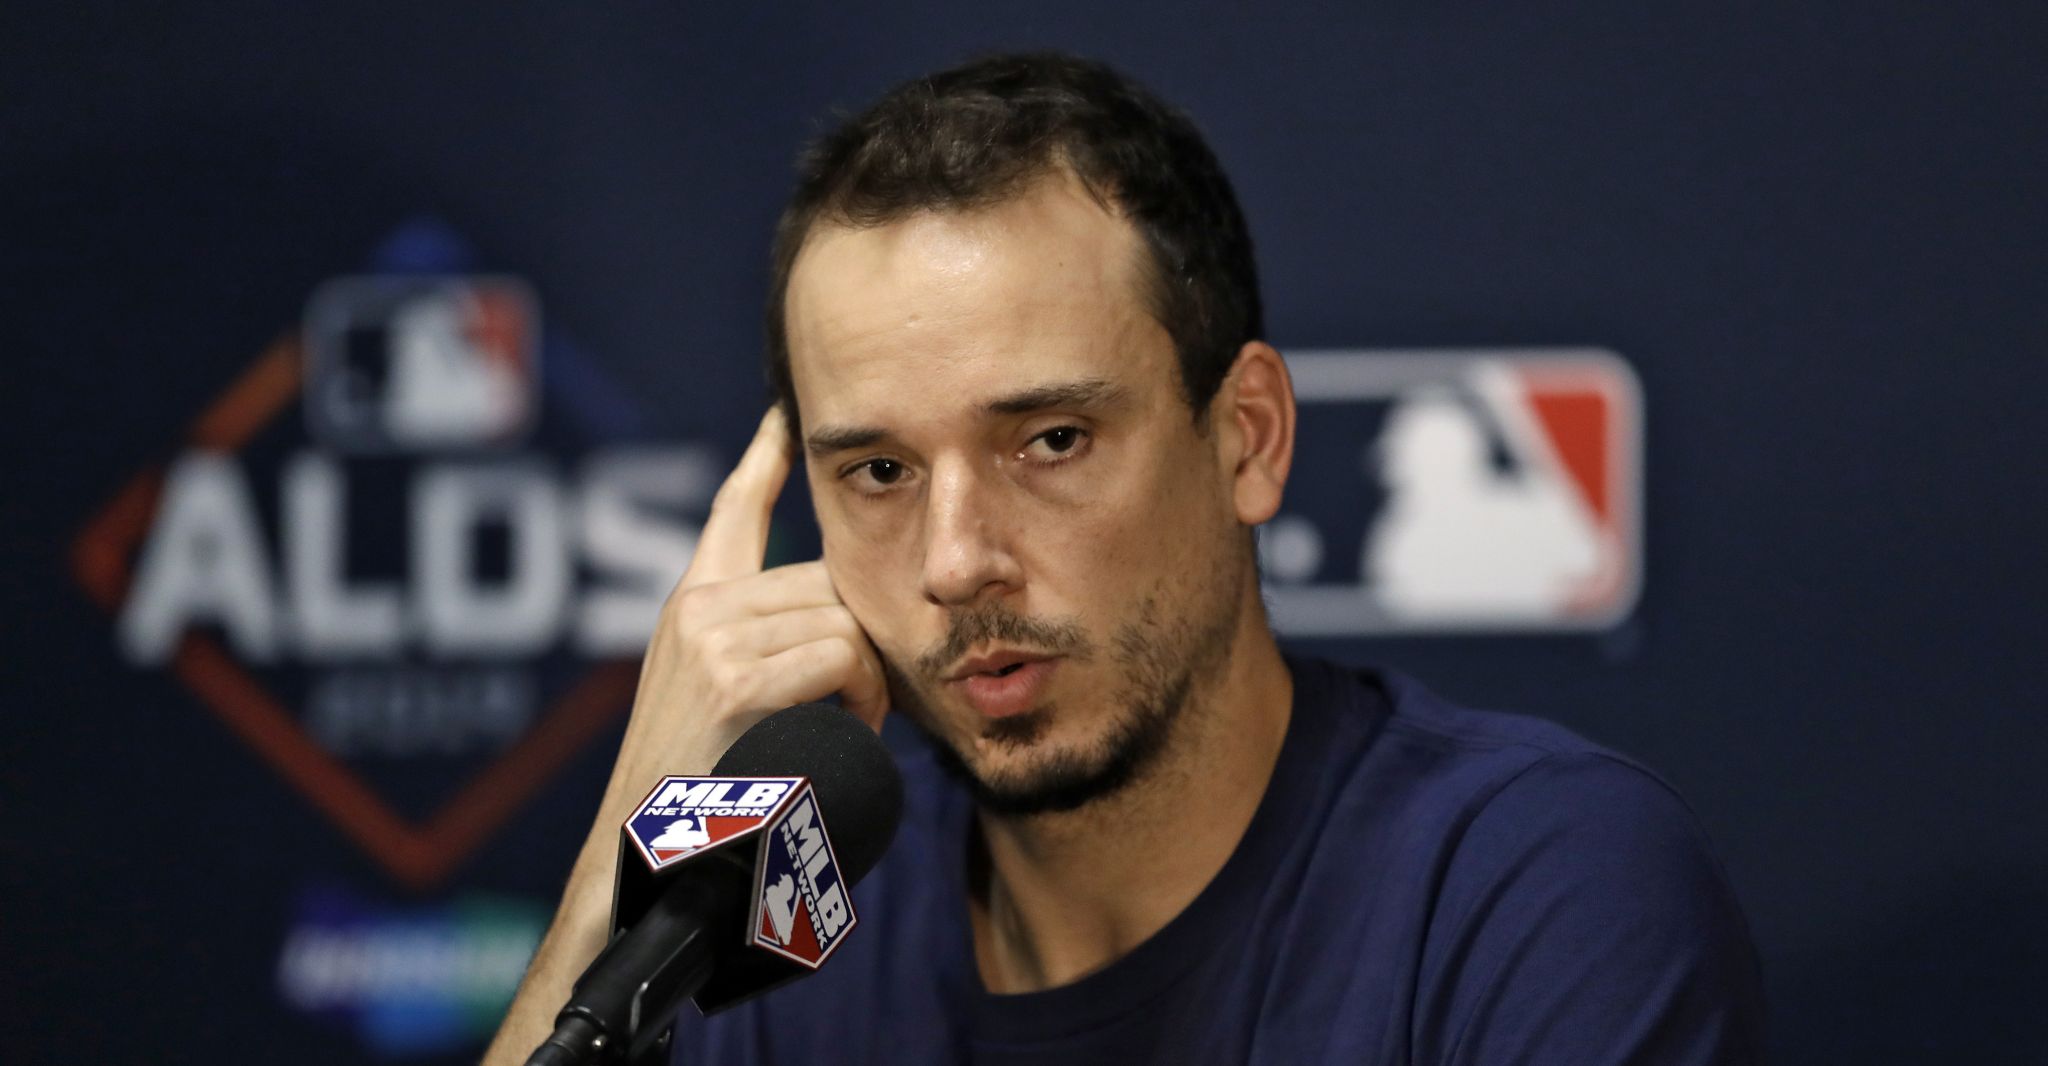 Did you hear this one about new Rays pitcher Charlie Morton